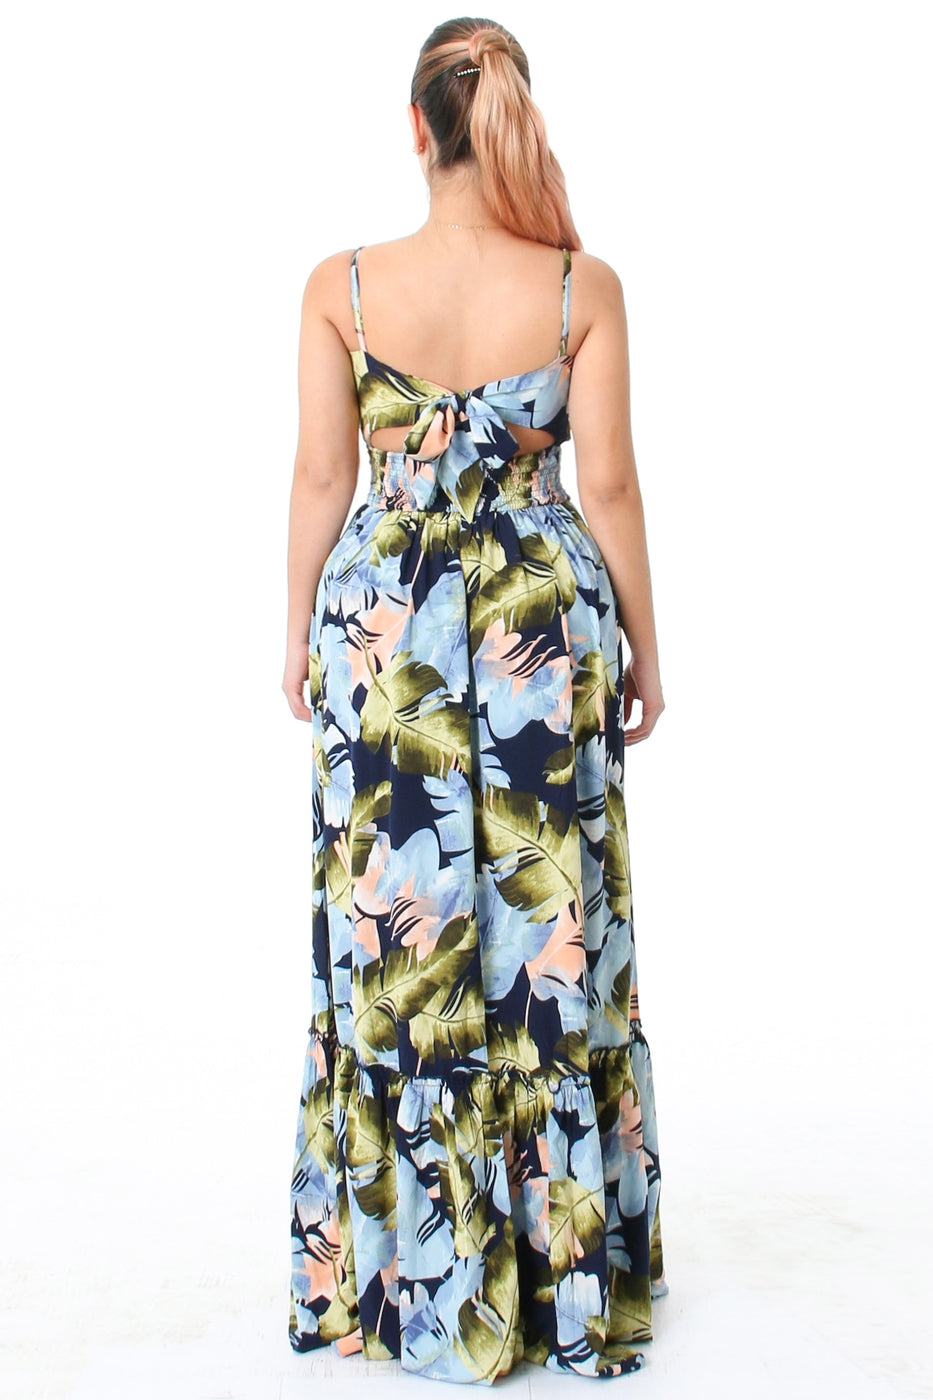 Dresses, Vacation Dresses, Maxi Dresses, Come Away With Me Printed Maxi Dress